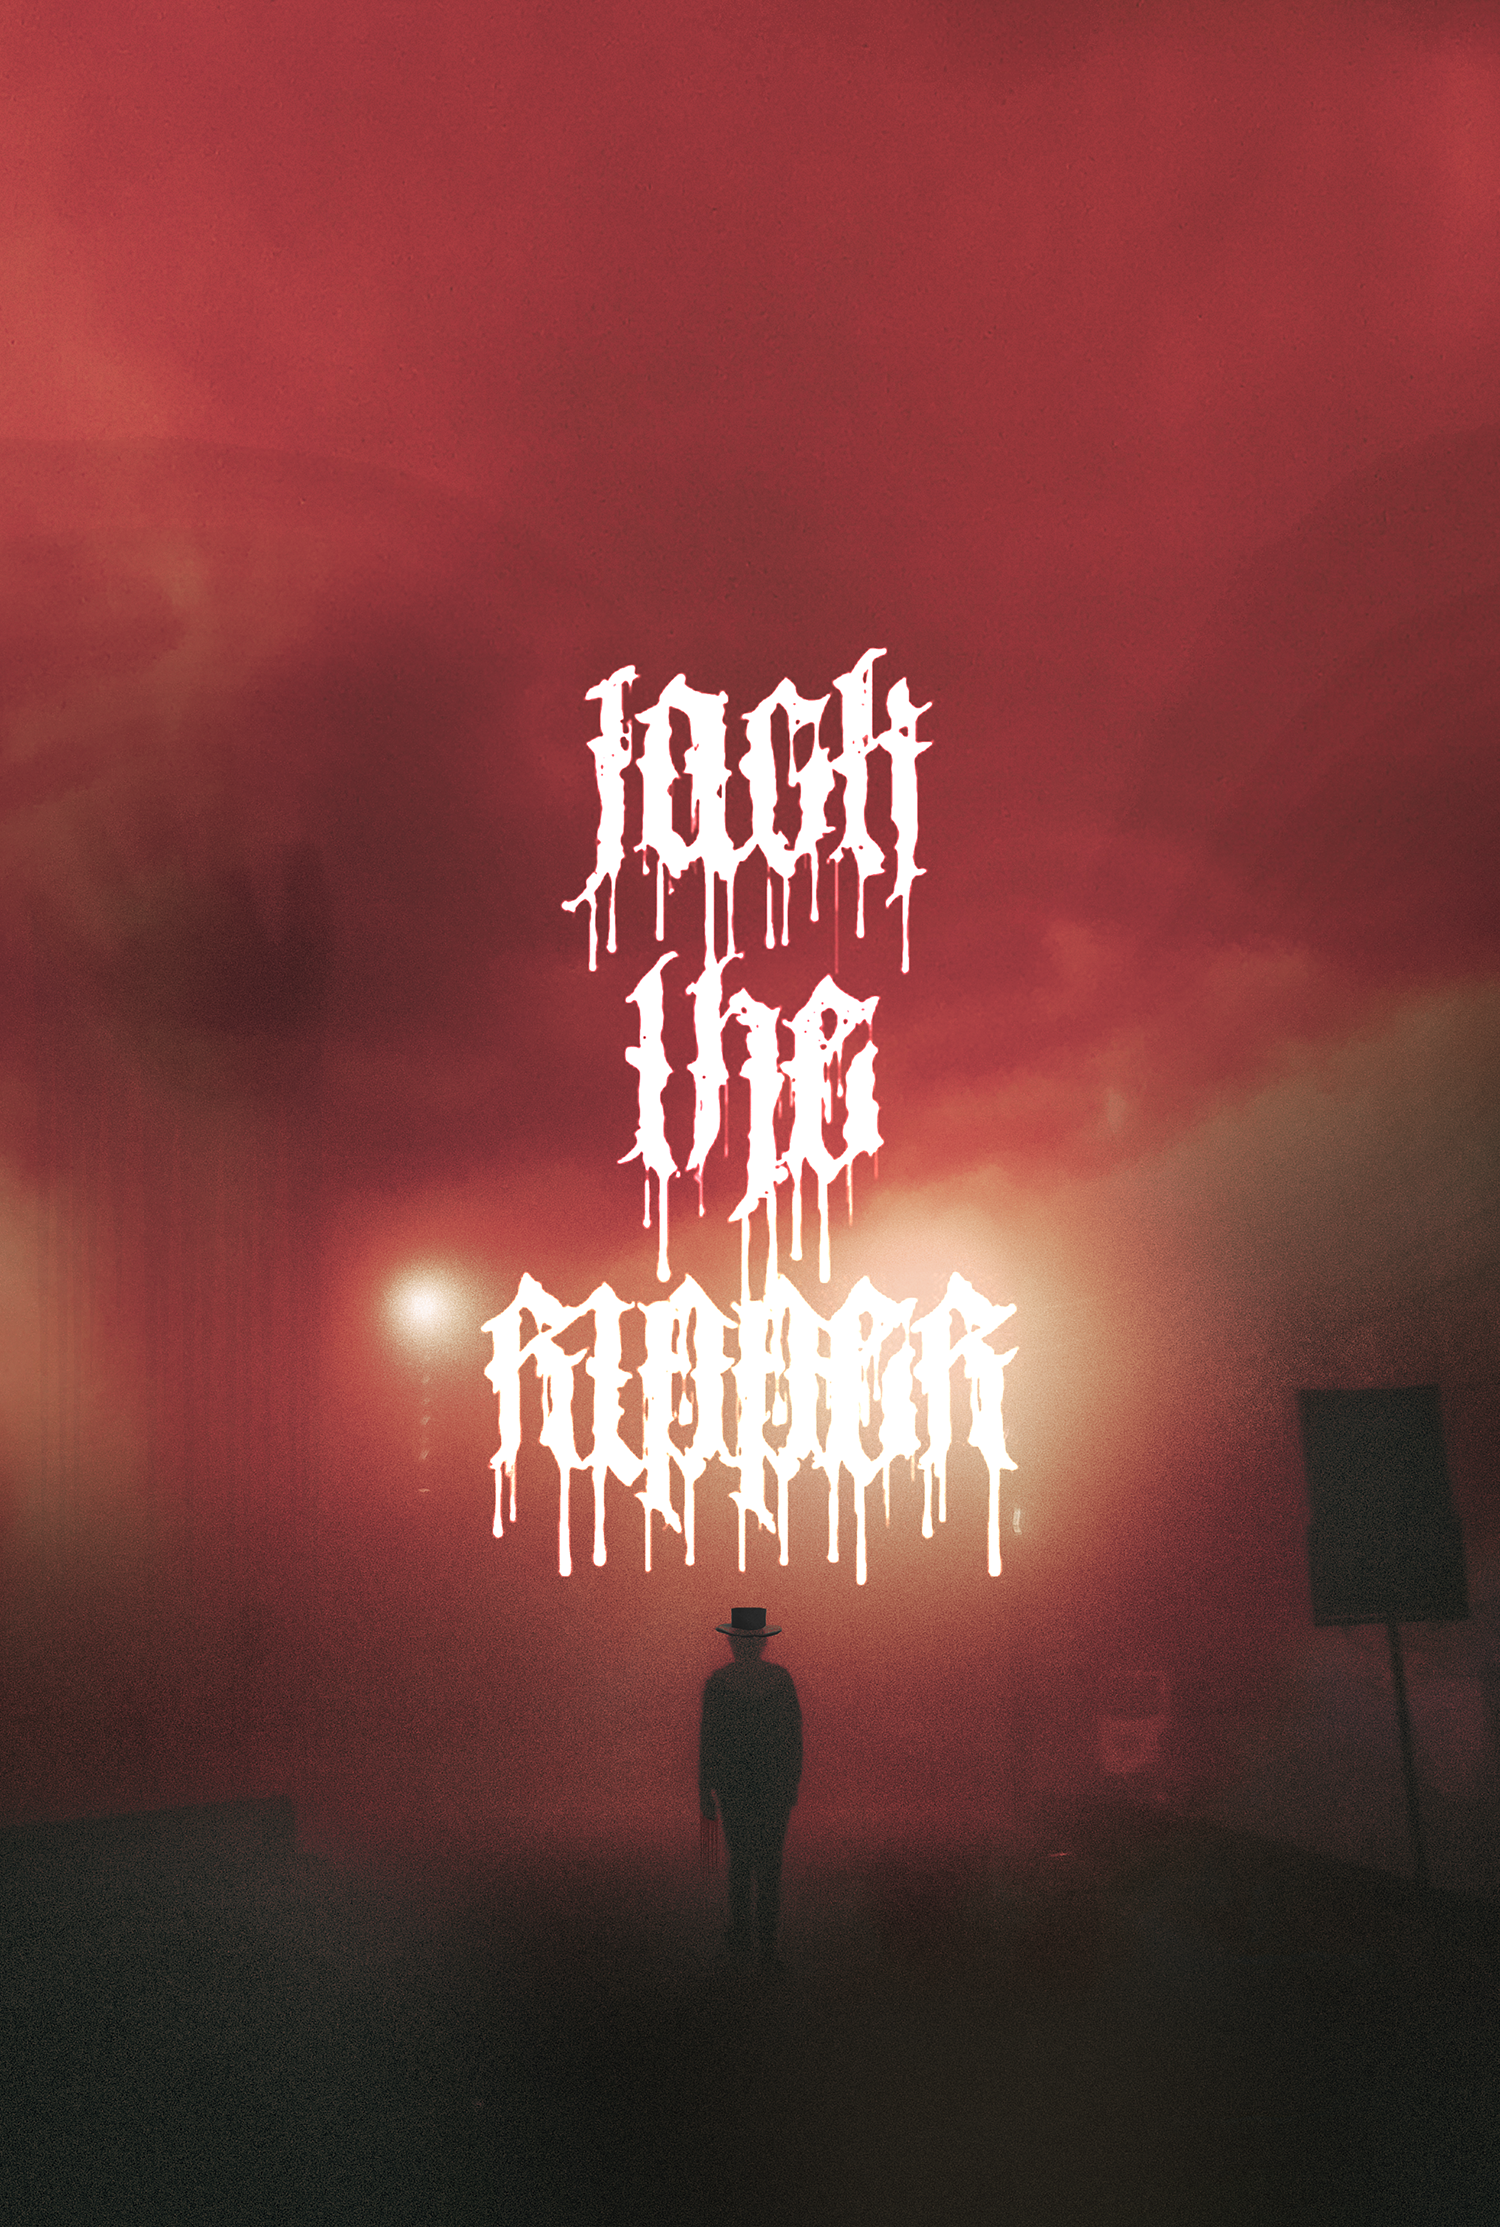 Jack the Ripper Font, an eroded Old English font with blood dripping from each letter